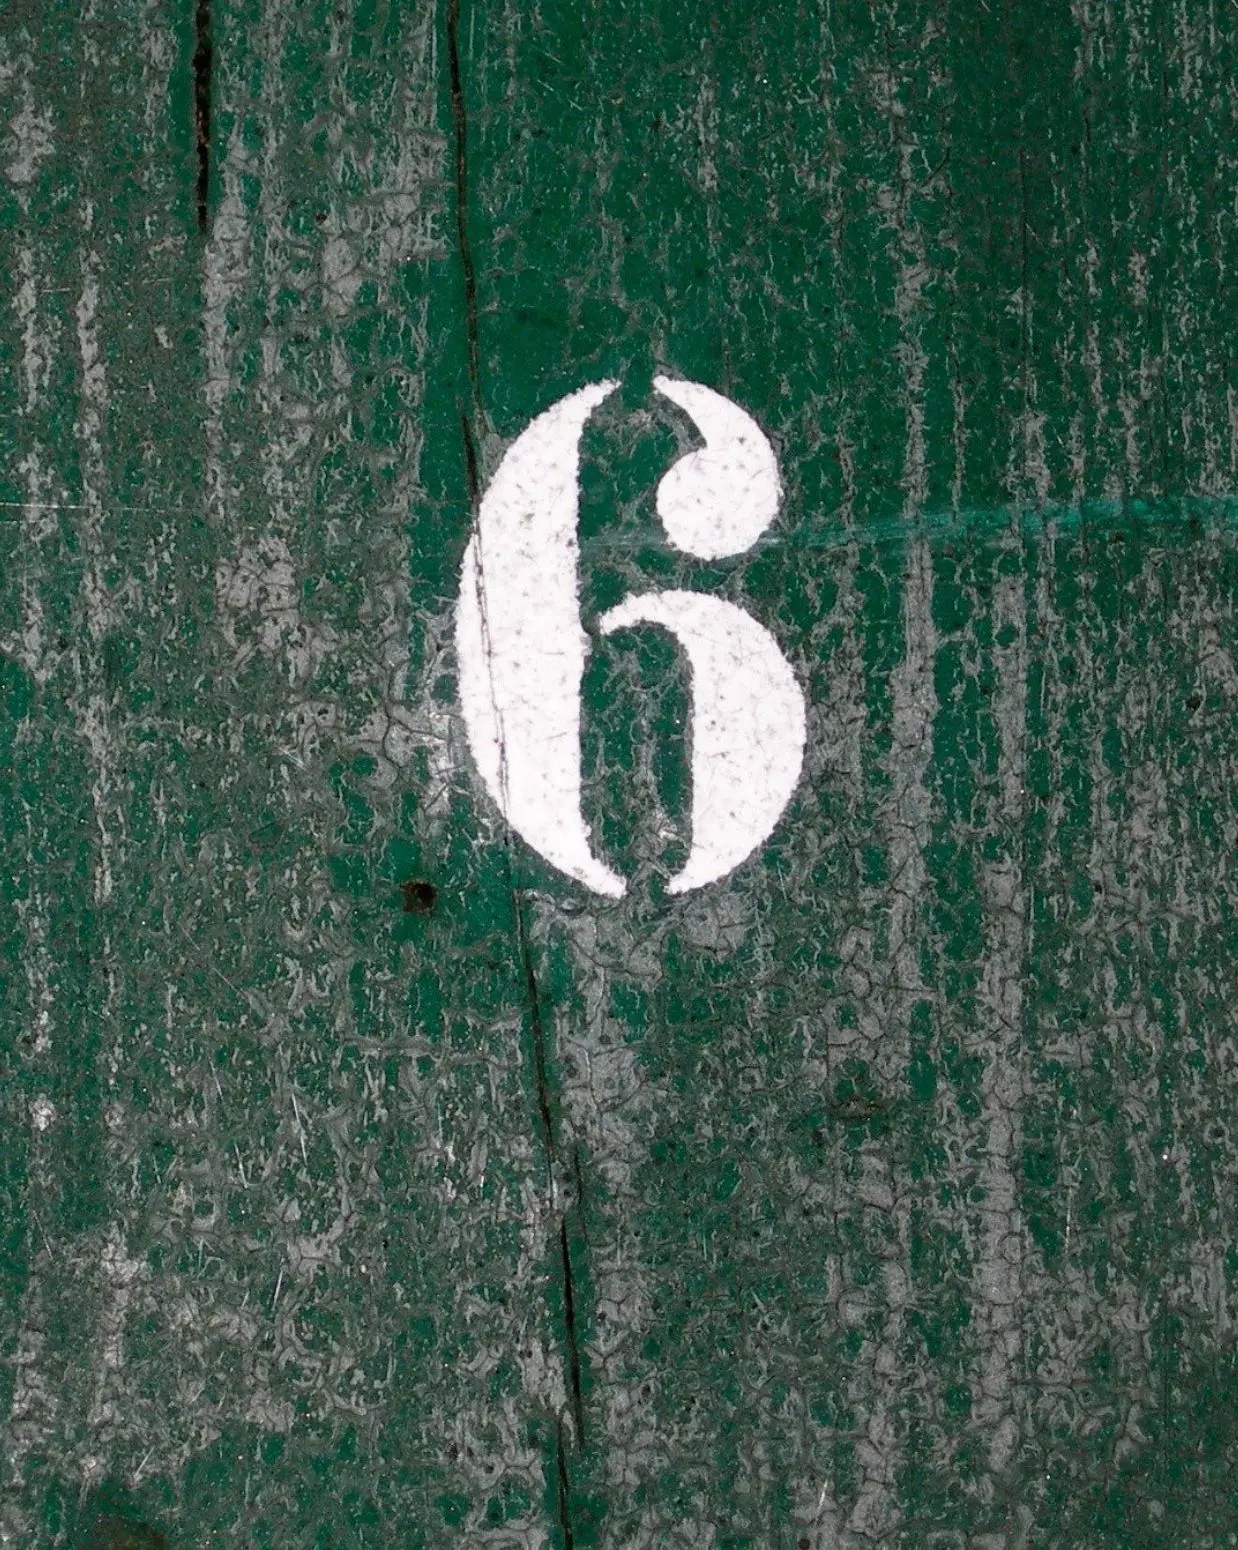 What Does It Mean If You See The Number 6 Repeatedly?